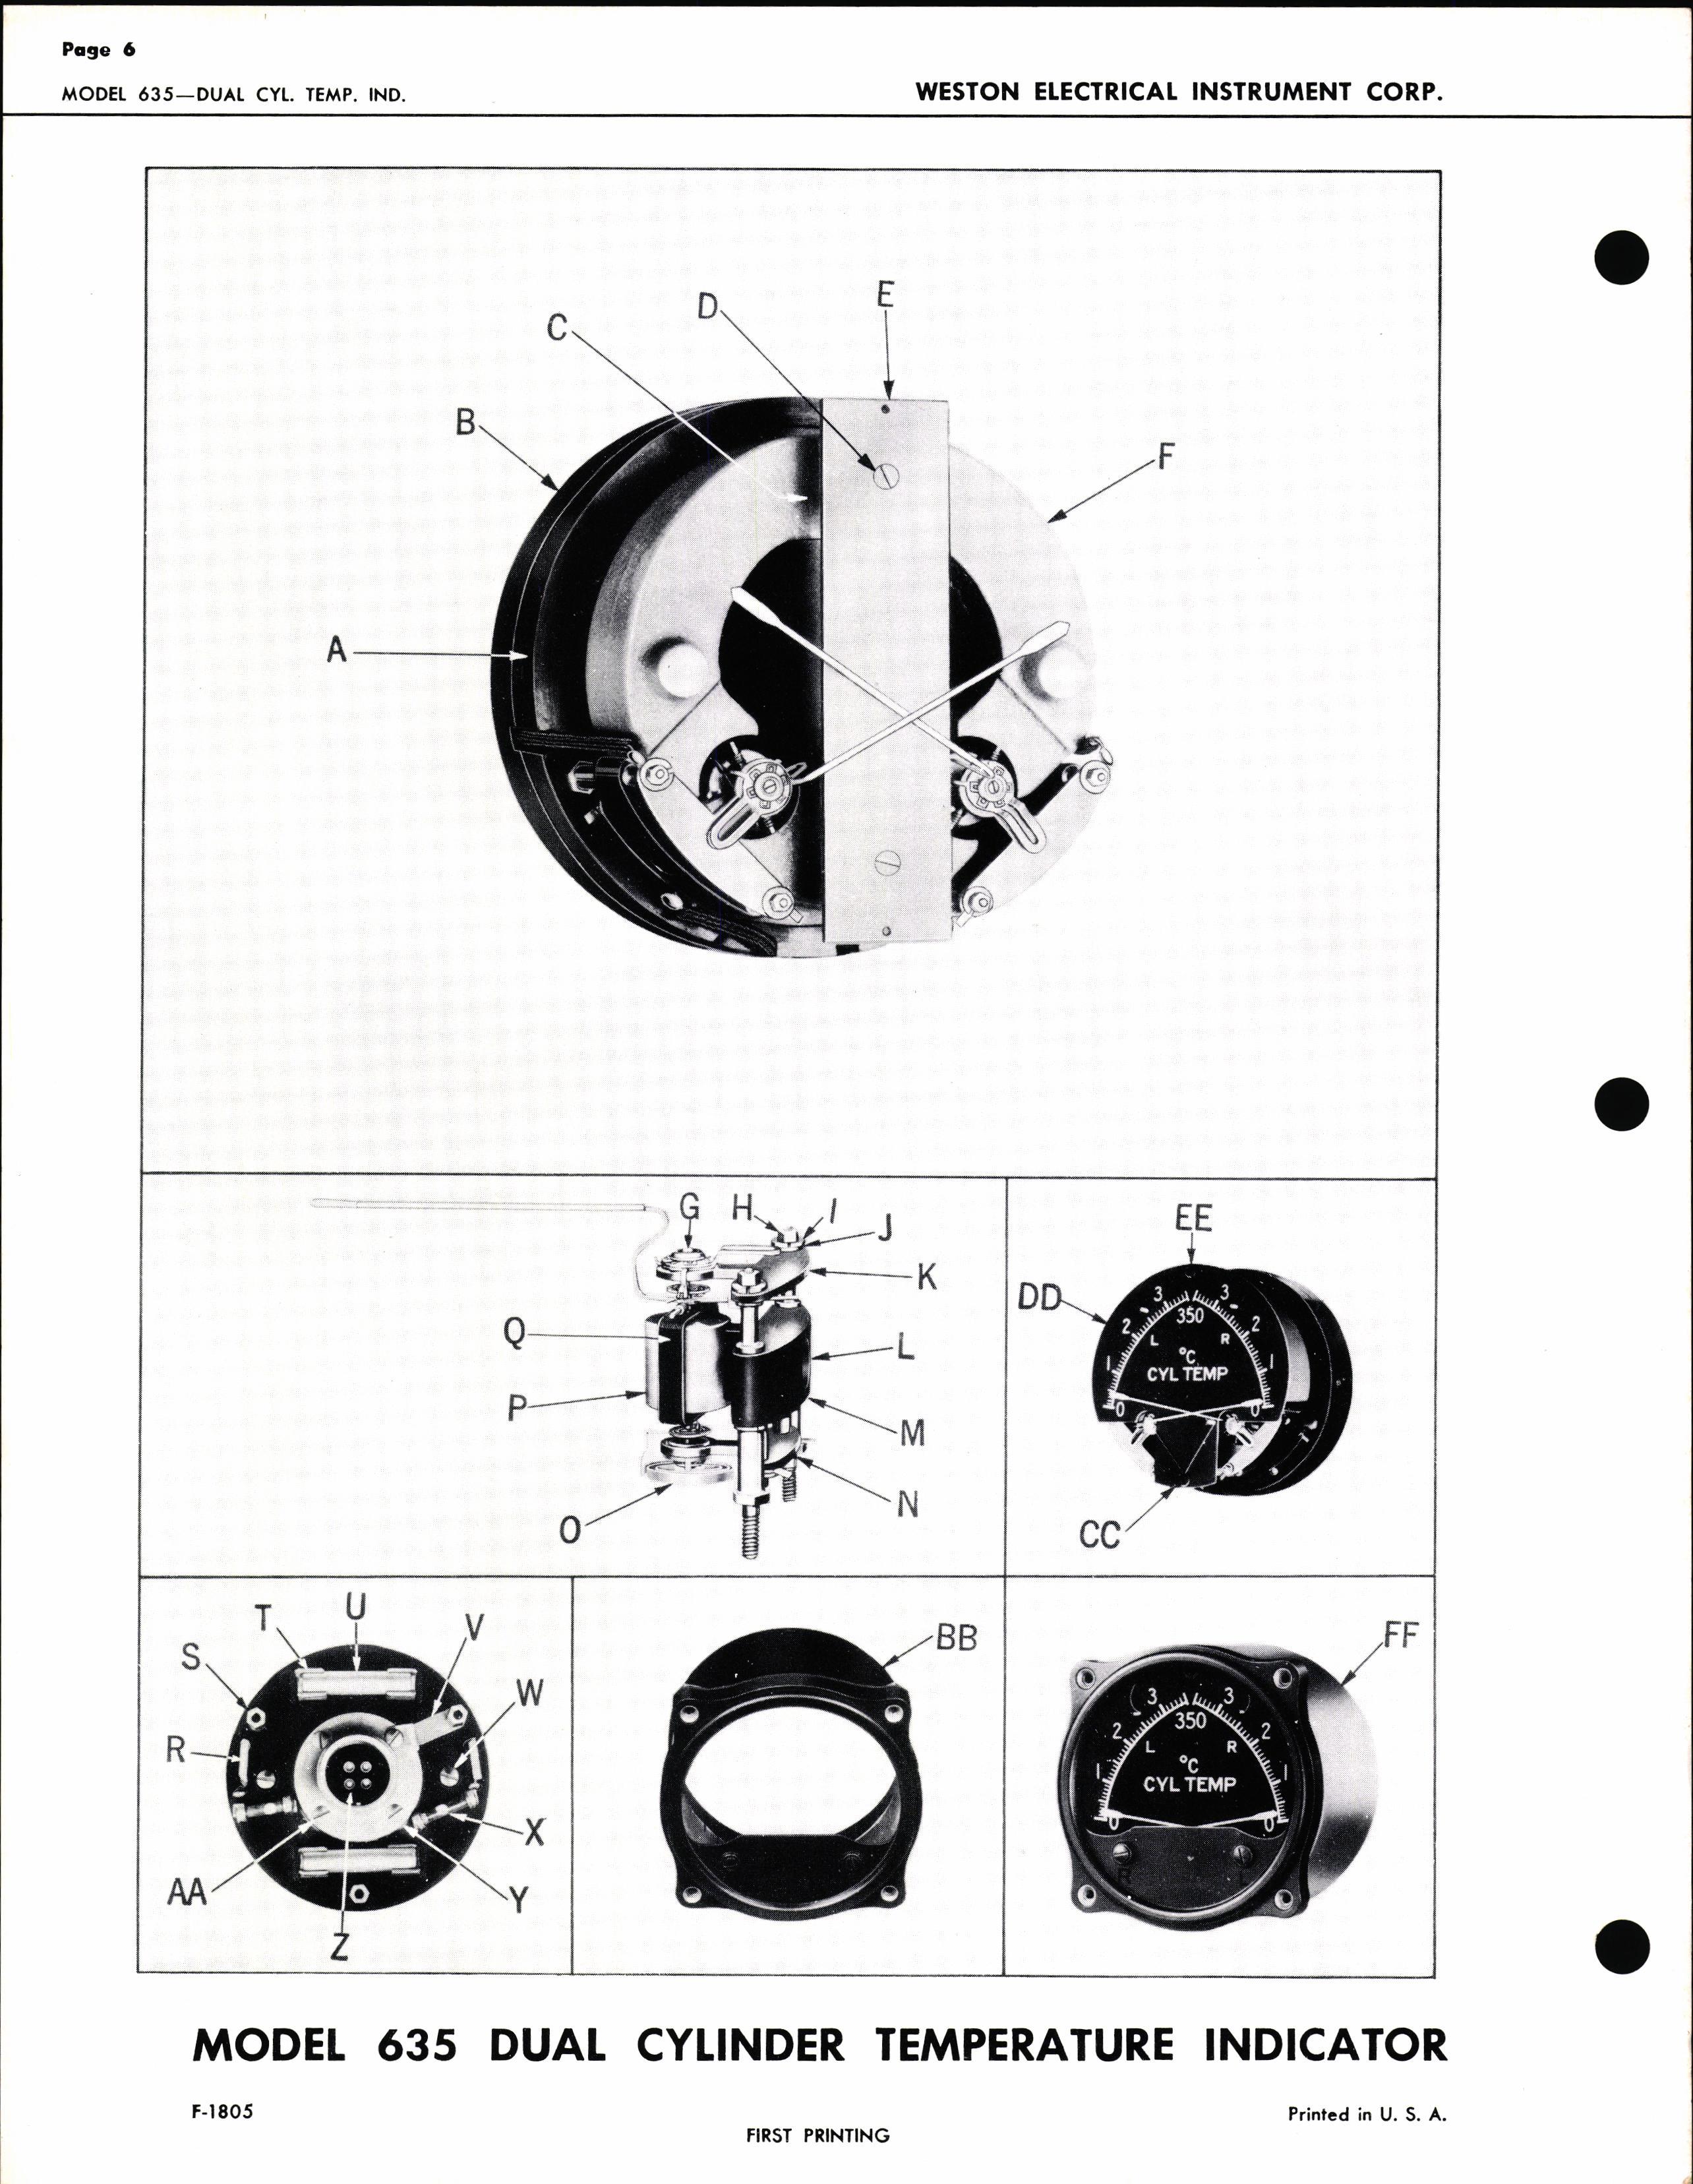 Sample page 6 from AirCorps Library document: Service Instructions for model 635 Dual Cylinder Temperature Indicators